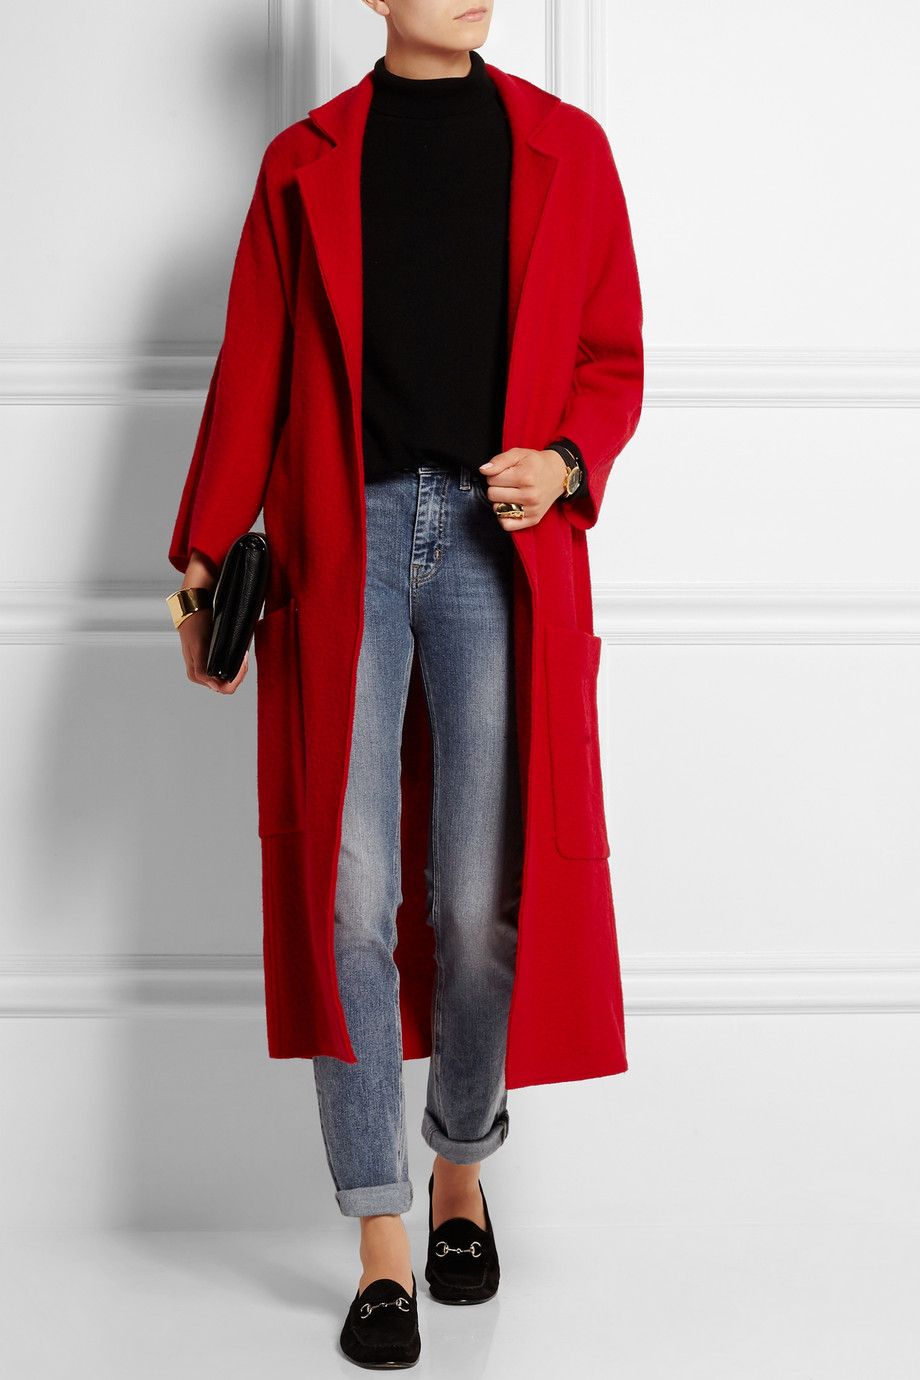 Teddy Coat Outfit Ideas That Are Super Cozy